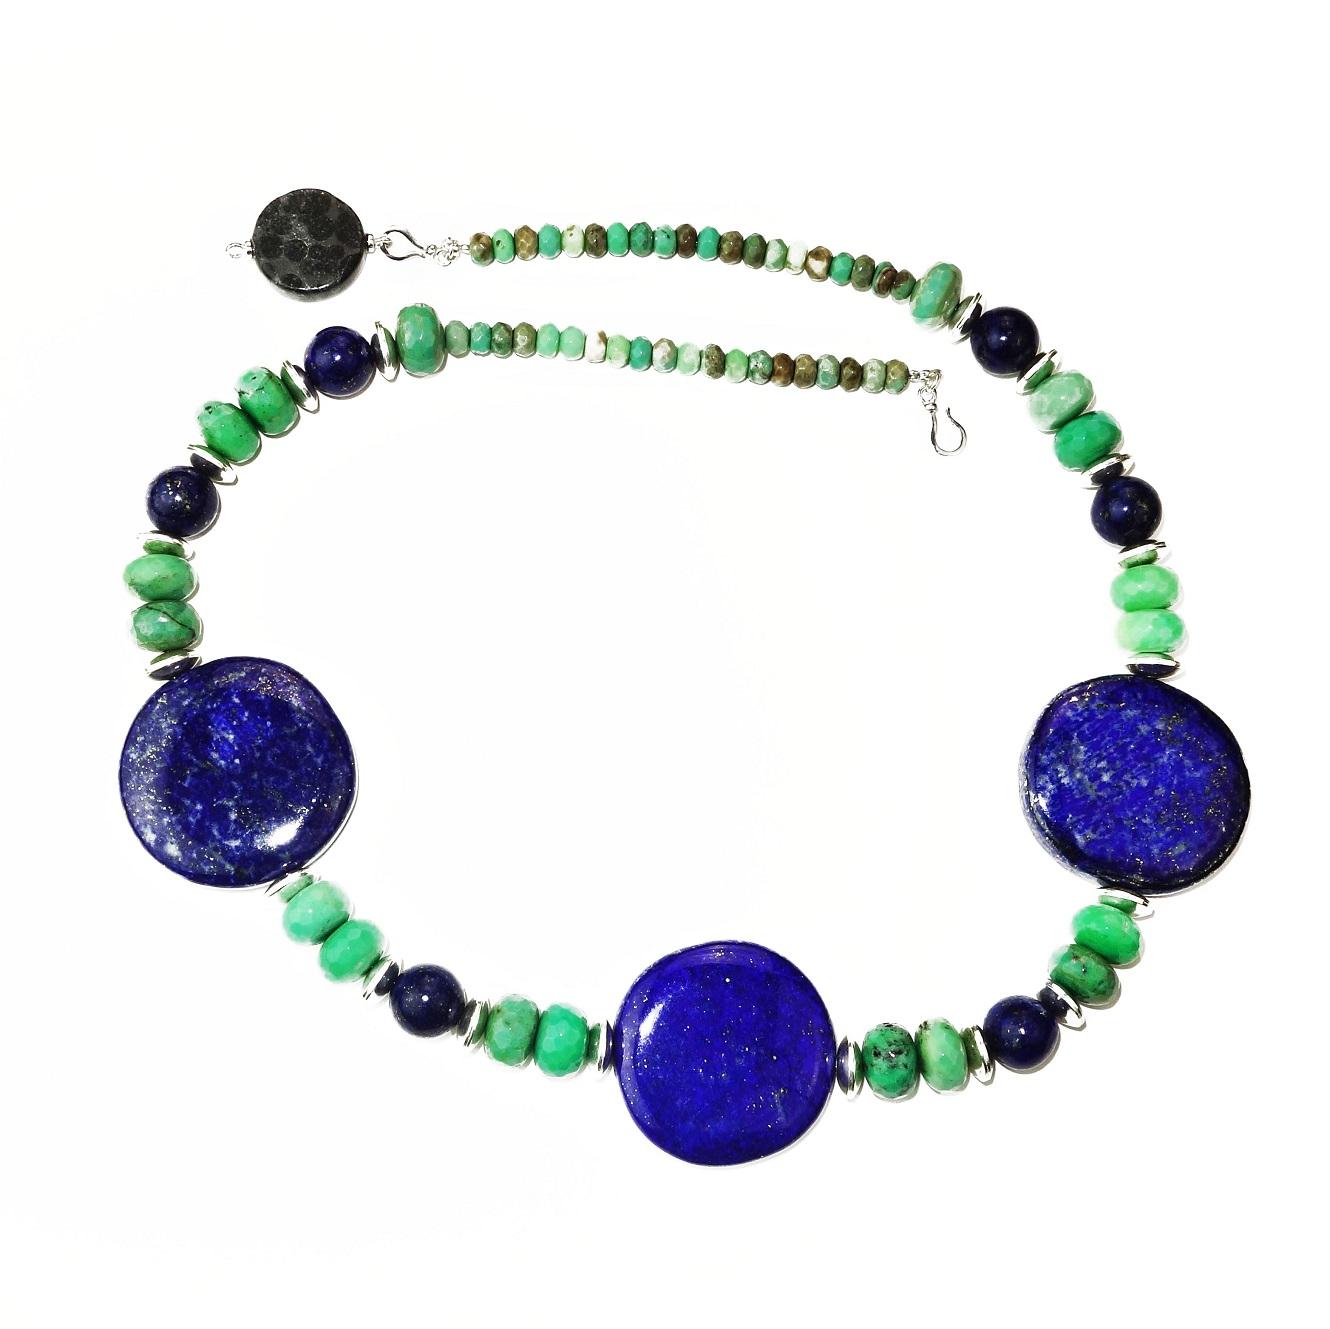 Bead AJD Statement Necklace in Lapis Lazuli, Chrysoprase, and Silver